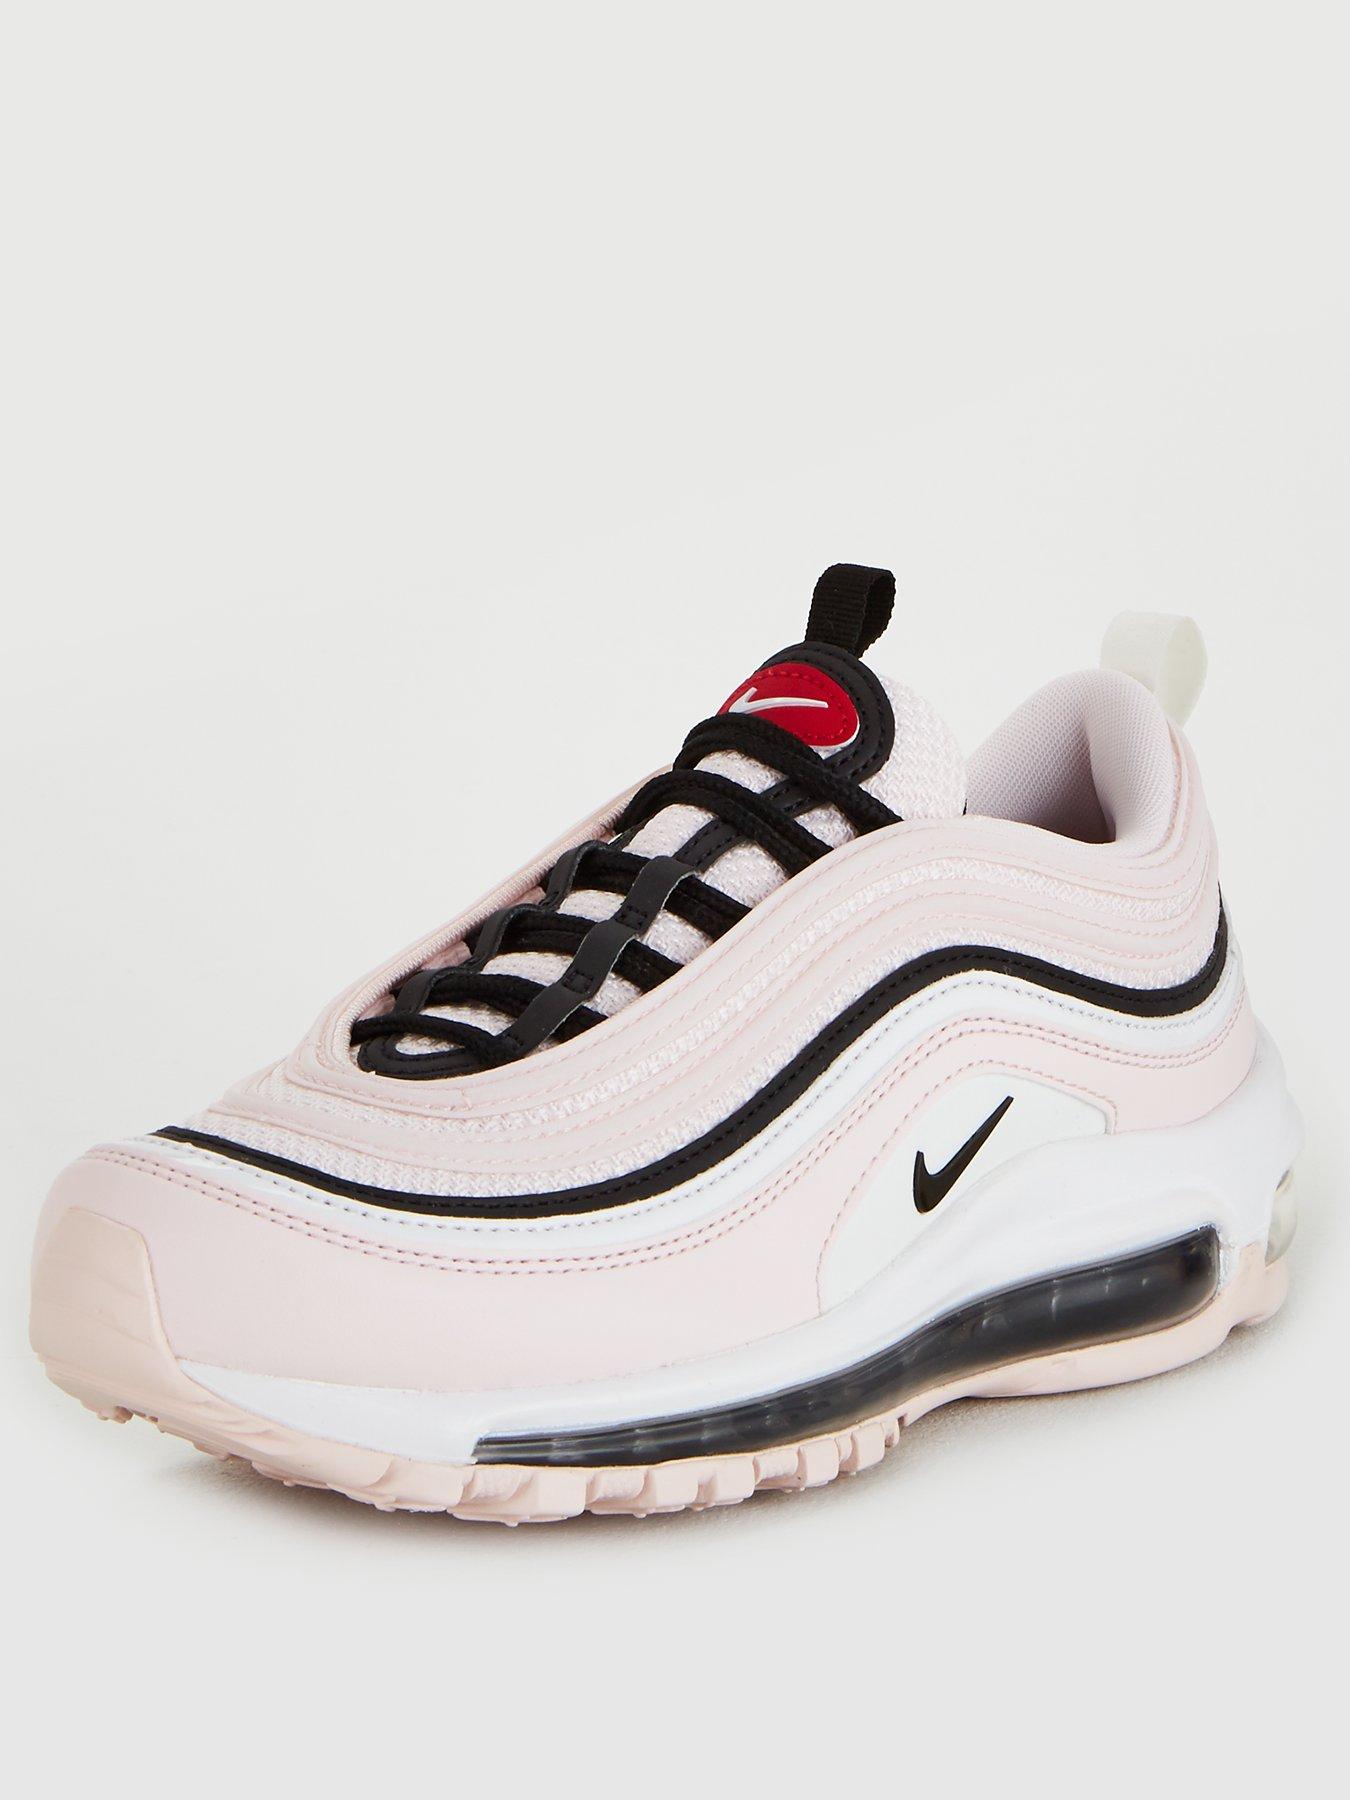 black and pink 97s